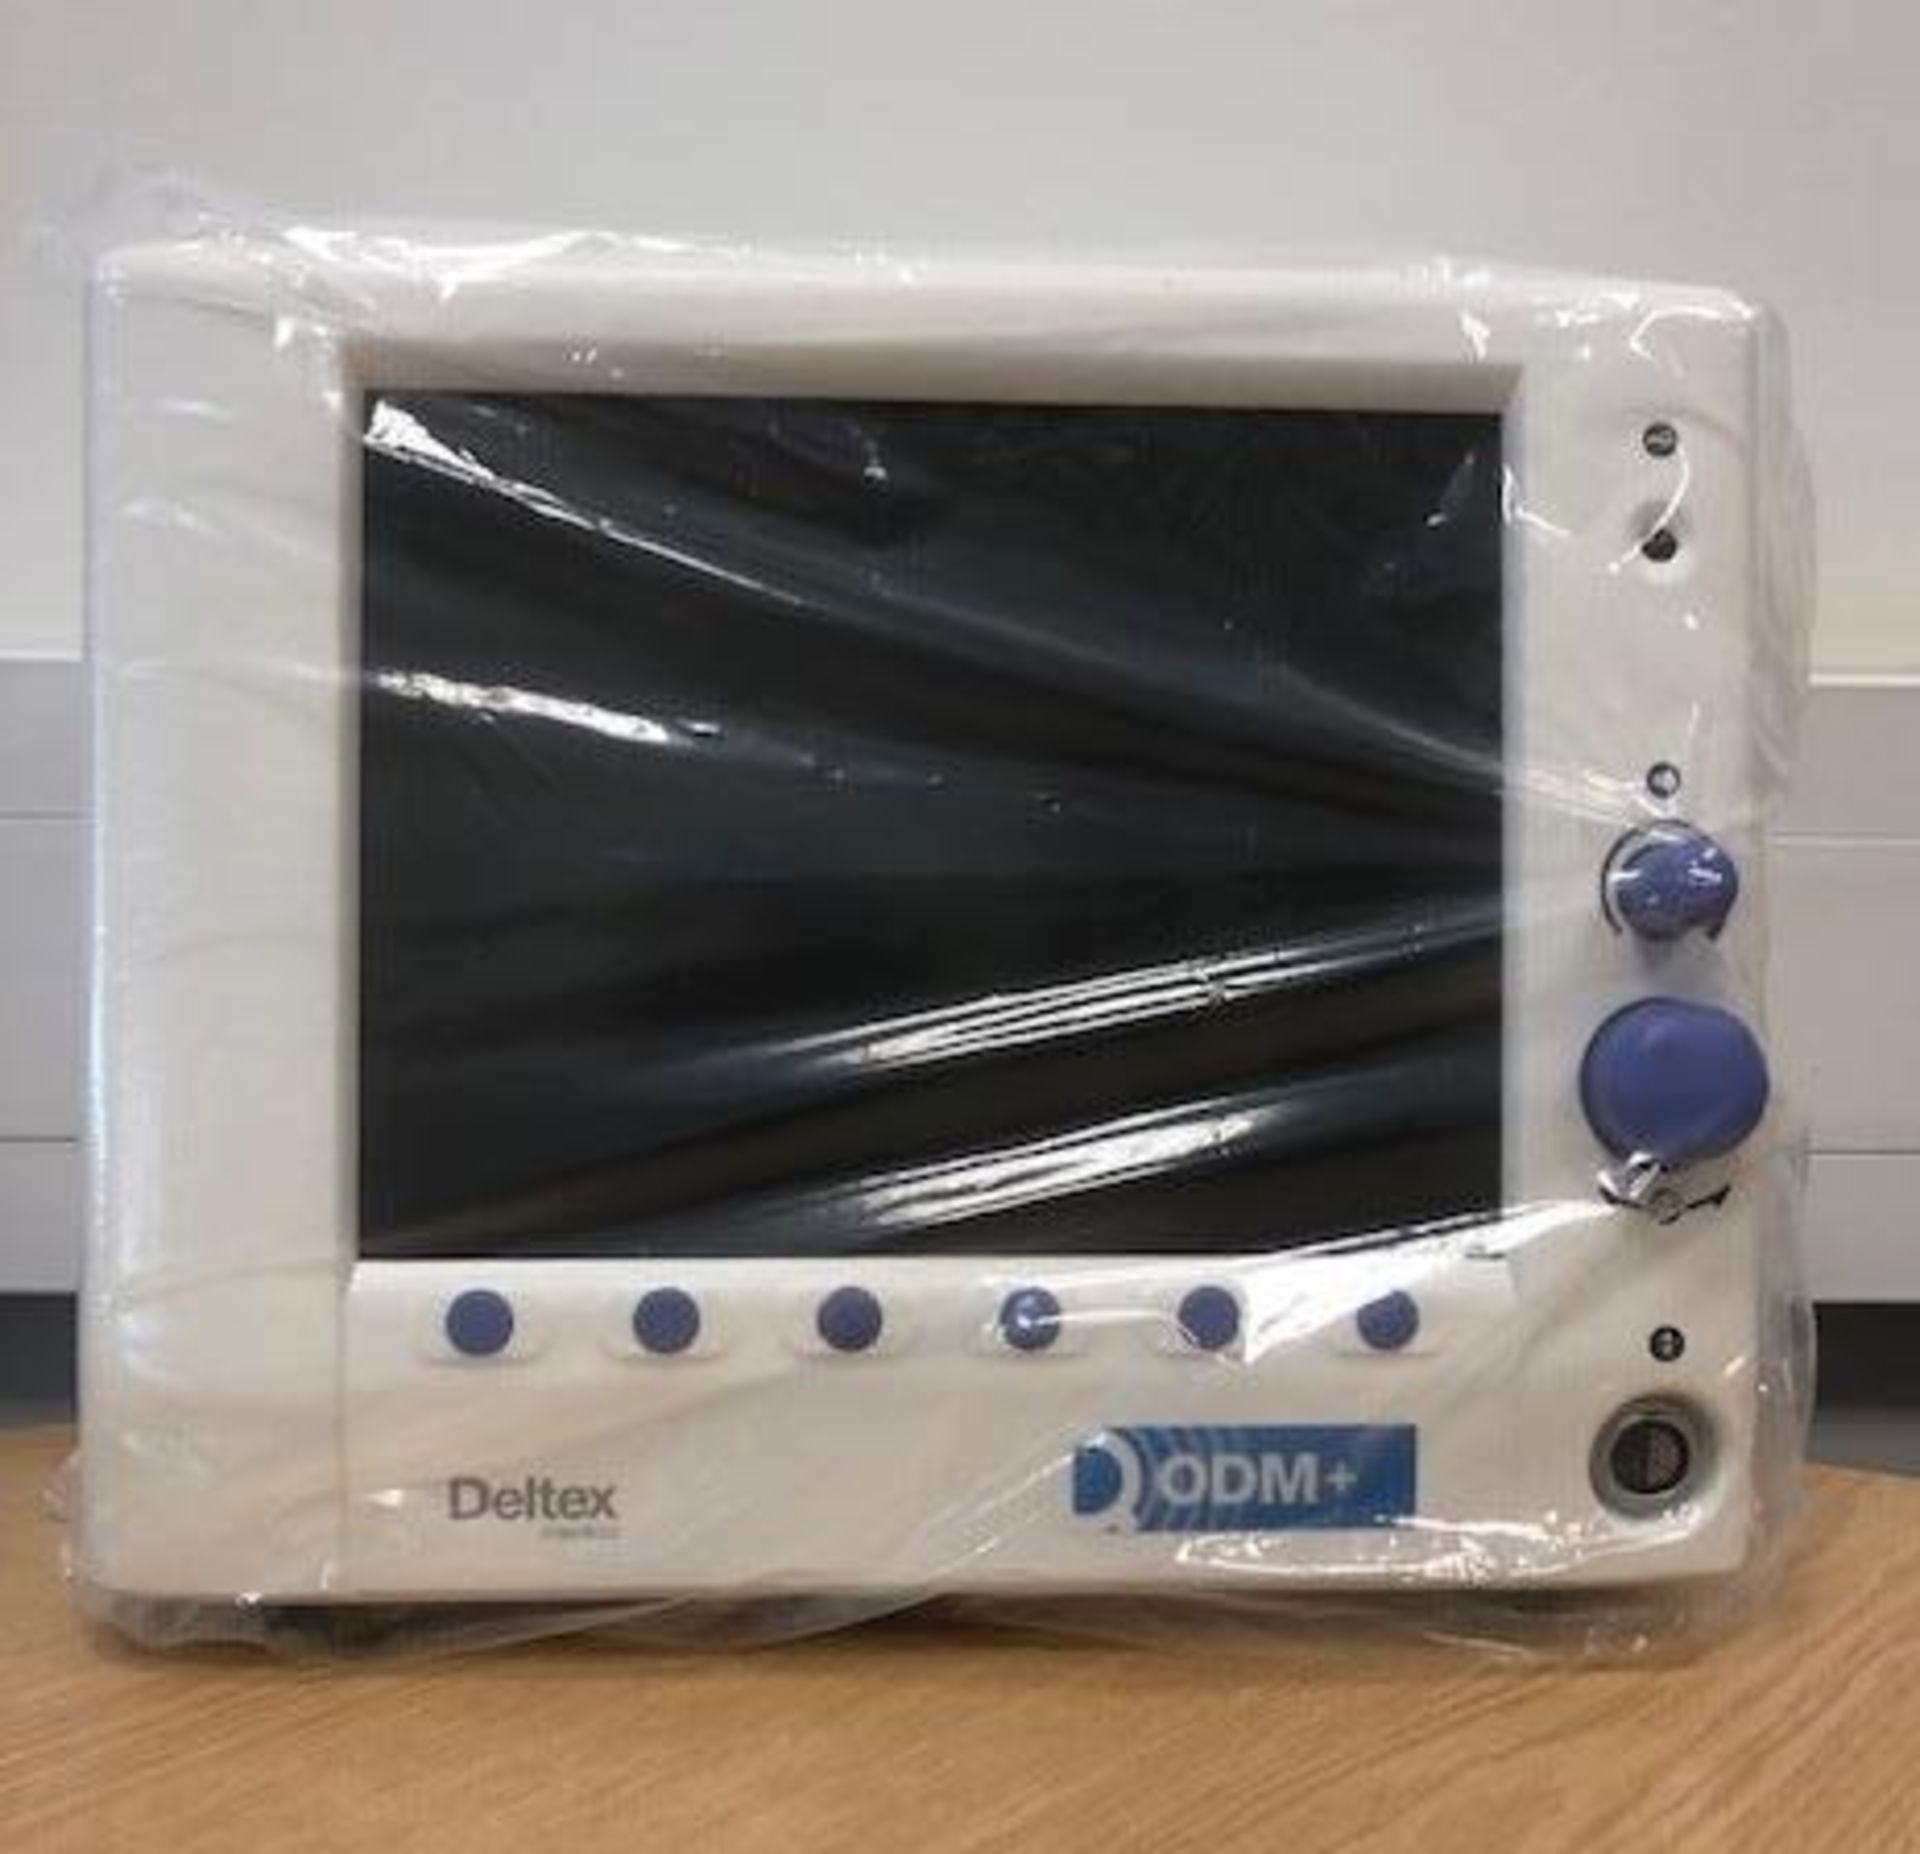 LOCATED OFF SITE - A Deltex CardioQ-ODM+ patient monitor - The world’s first fluid managem